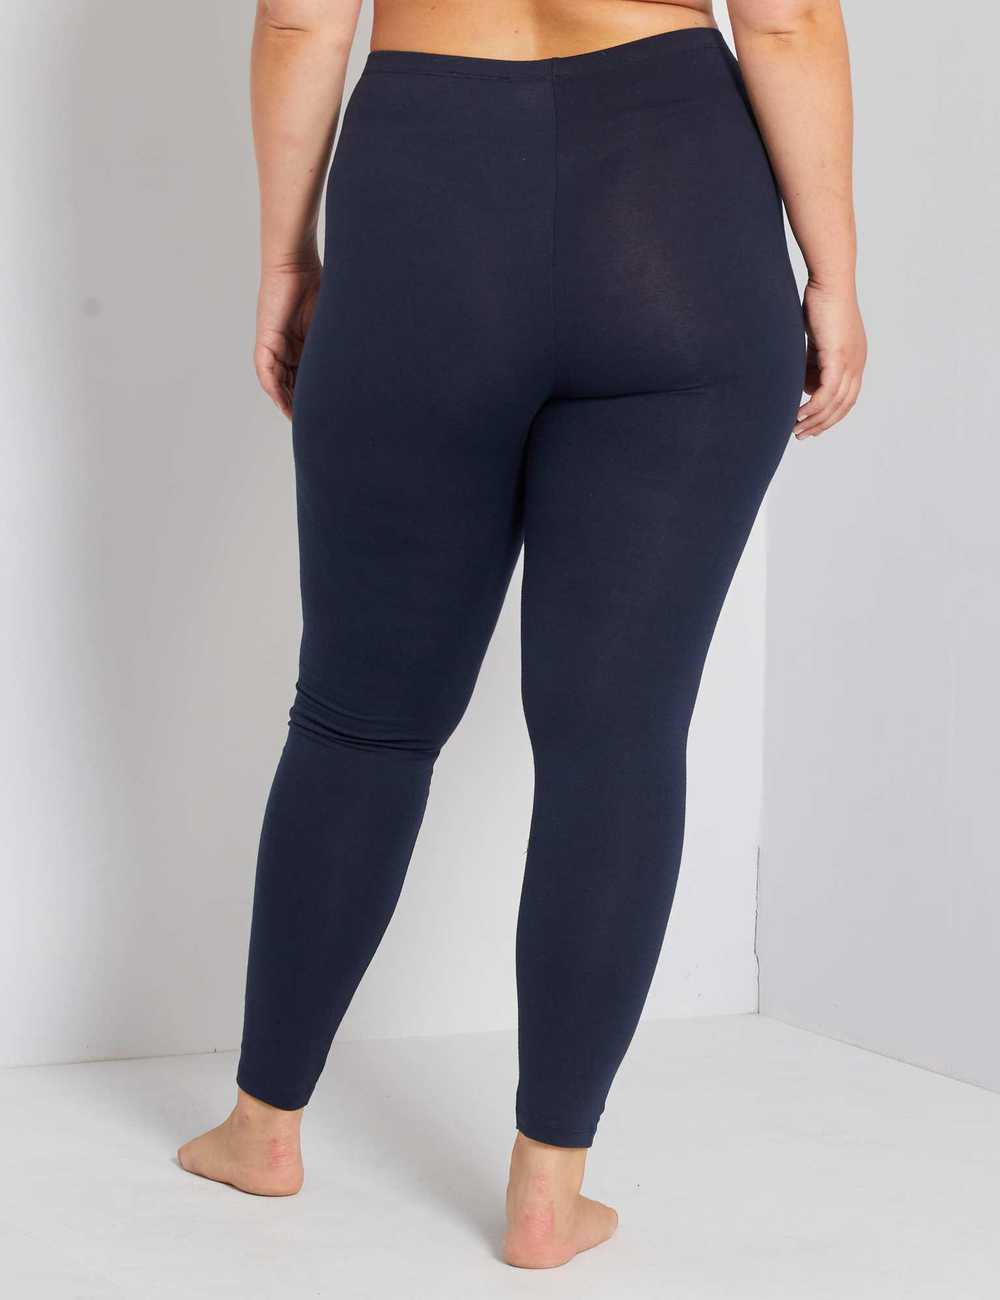 Lavania Cotton ankle length leggings, Size: Large and XXL at Rs